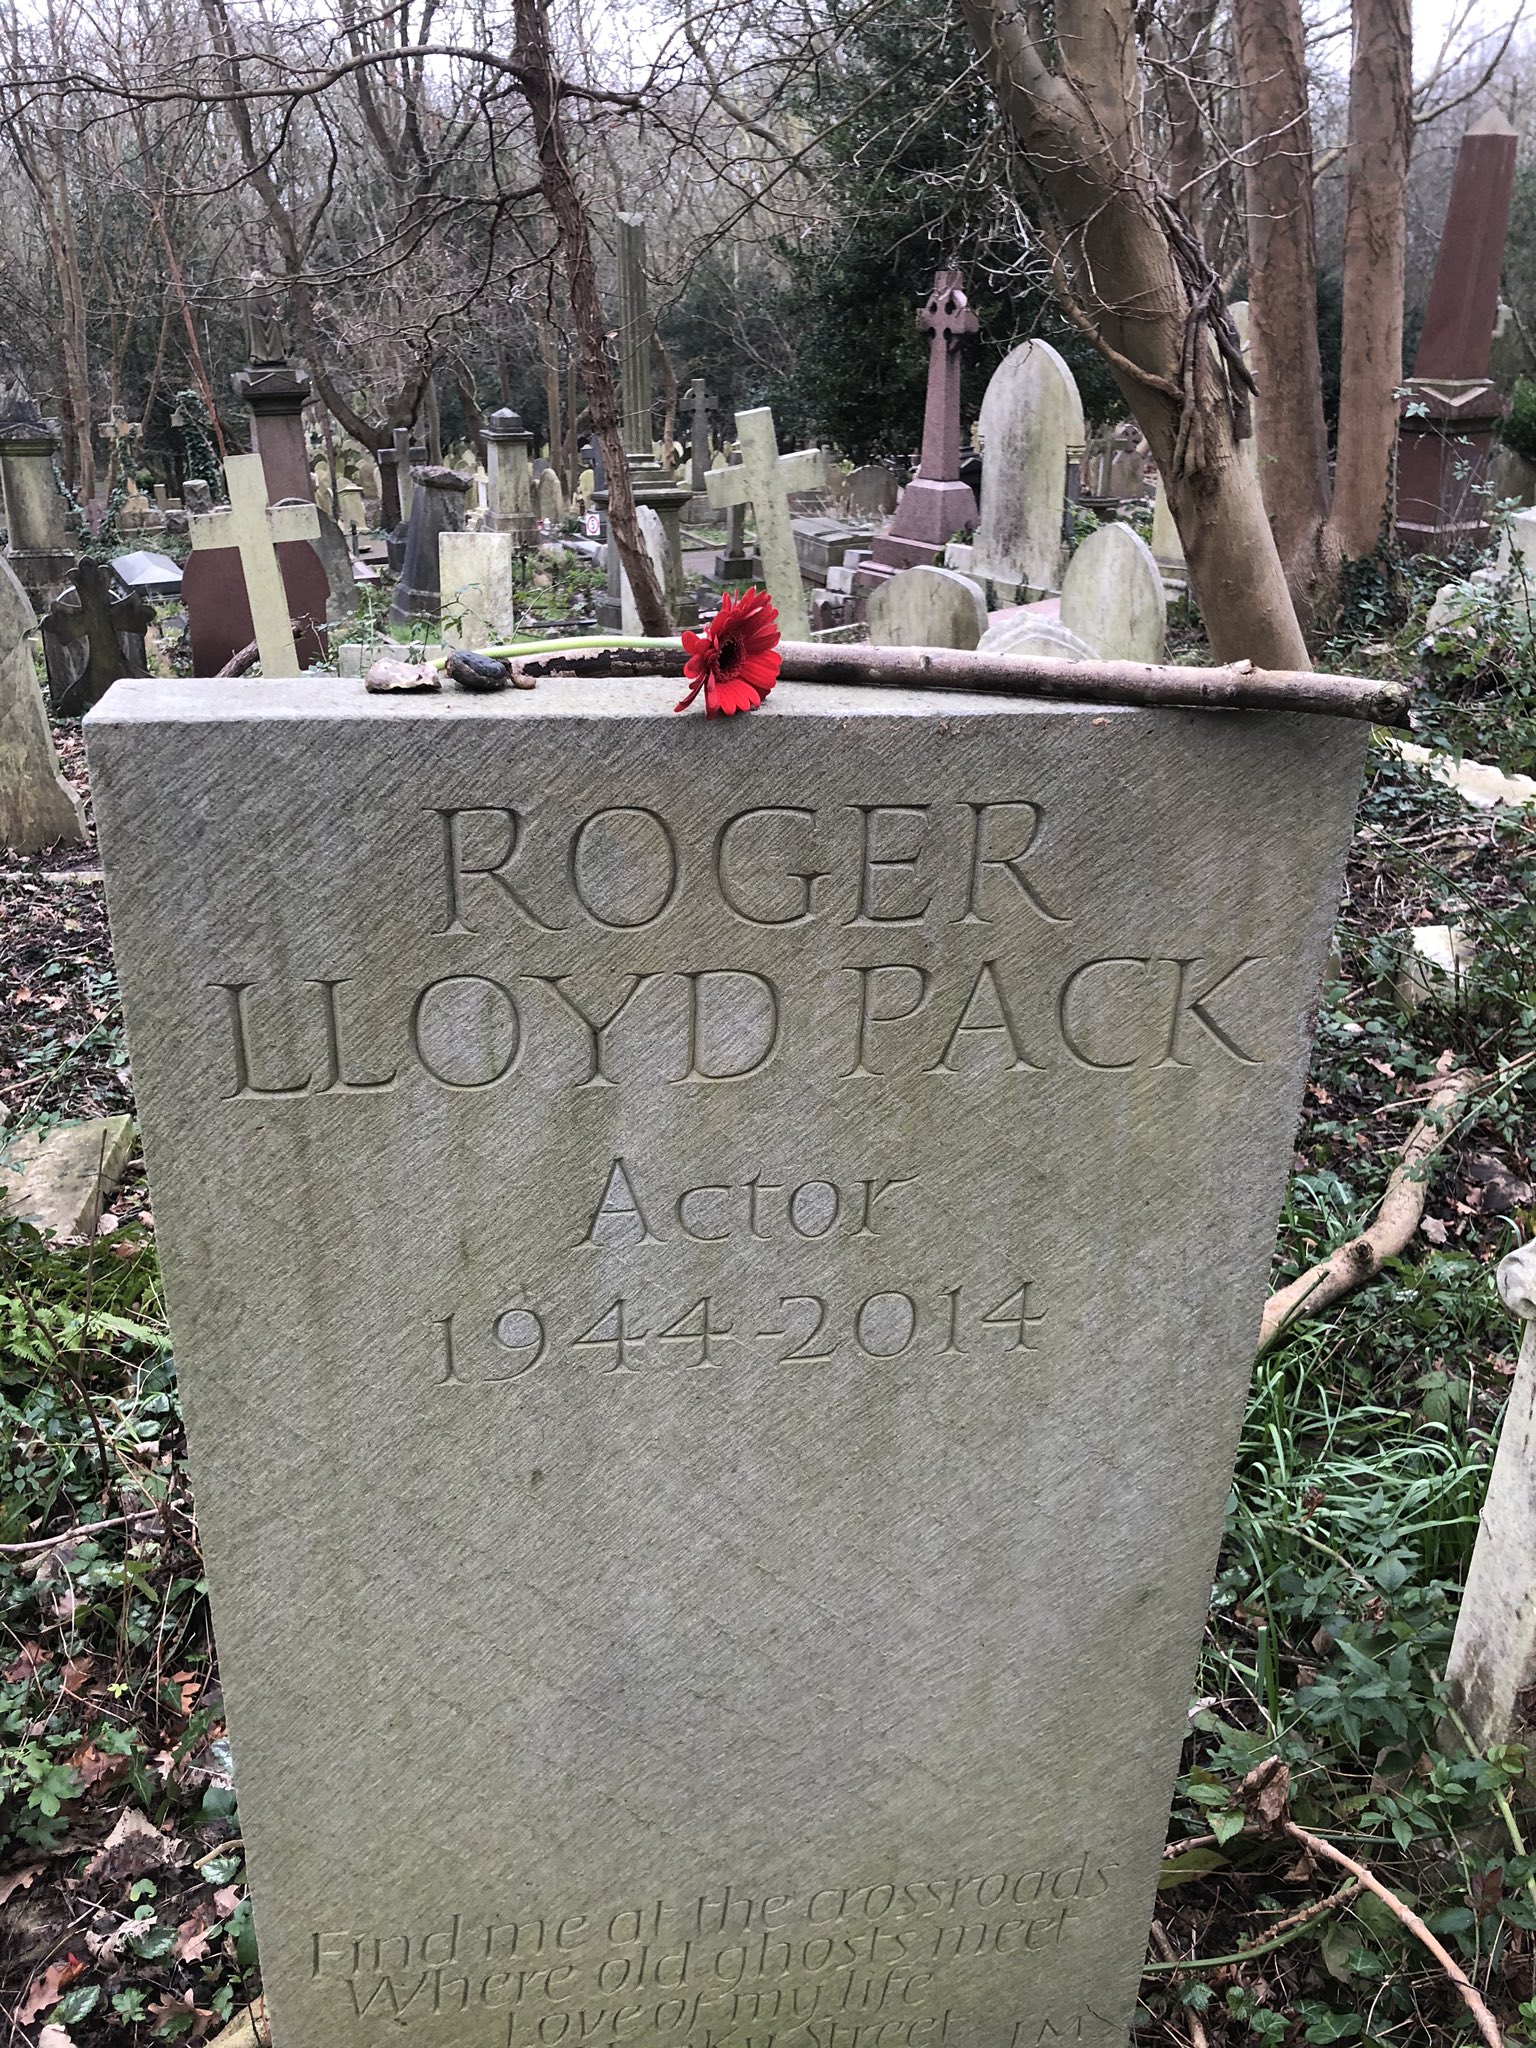 Sir Johnny Obe Went To Pay My Respects To A National Treasure Trigger Only Fools Amp Horses Legend Roger Lloyd Pack Forever In Our Hearts Beingboycie Sueholderness T Co Ust8fopr44